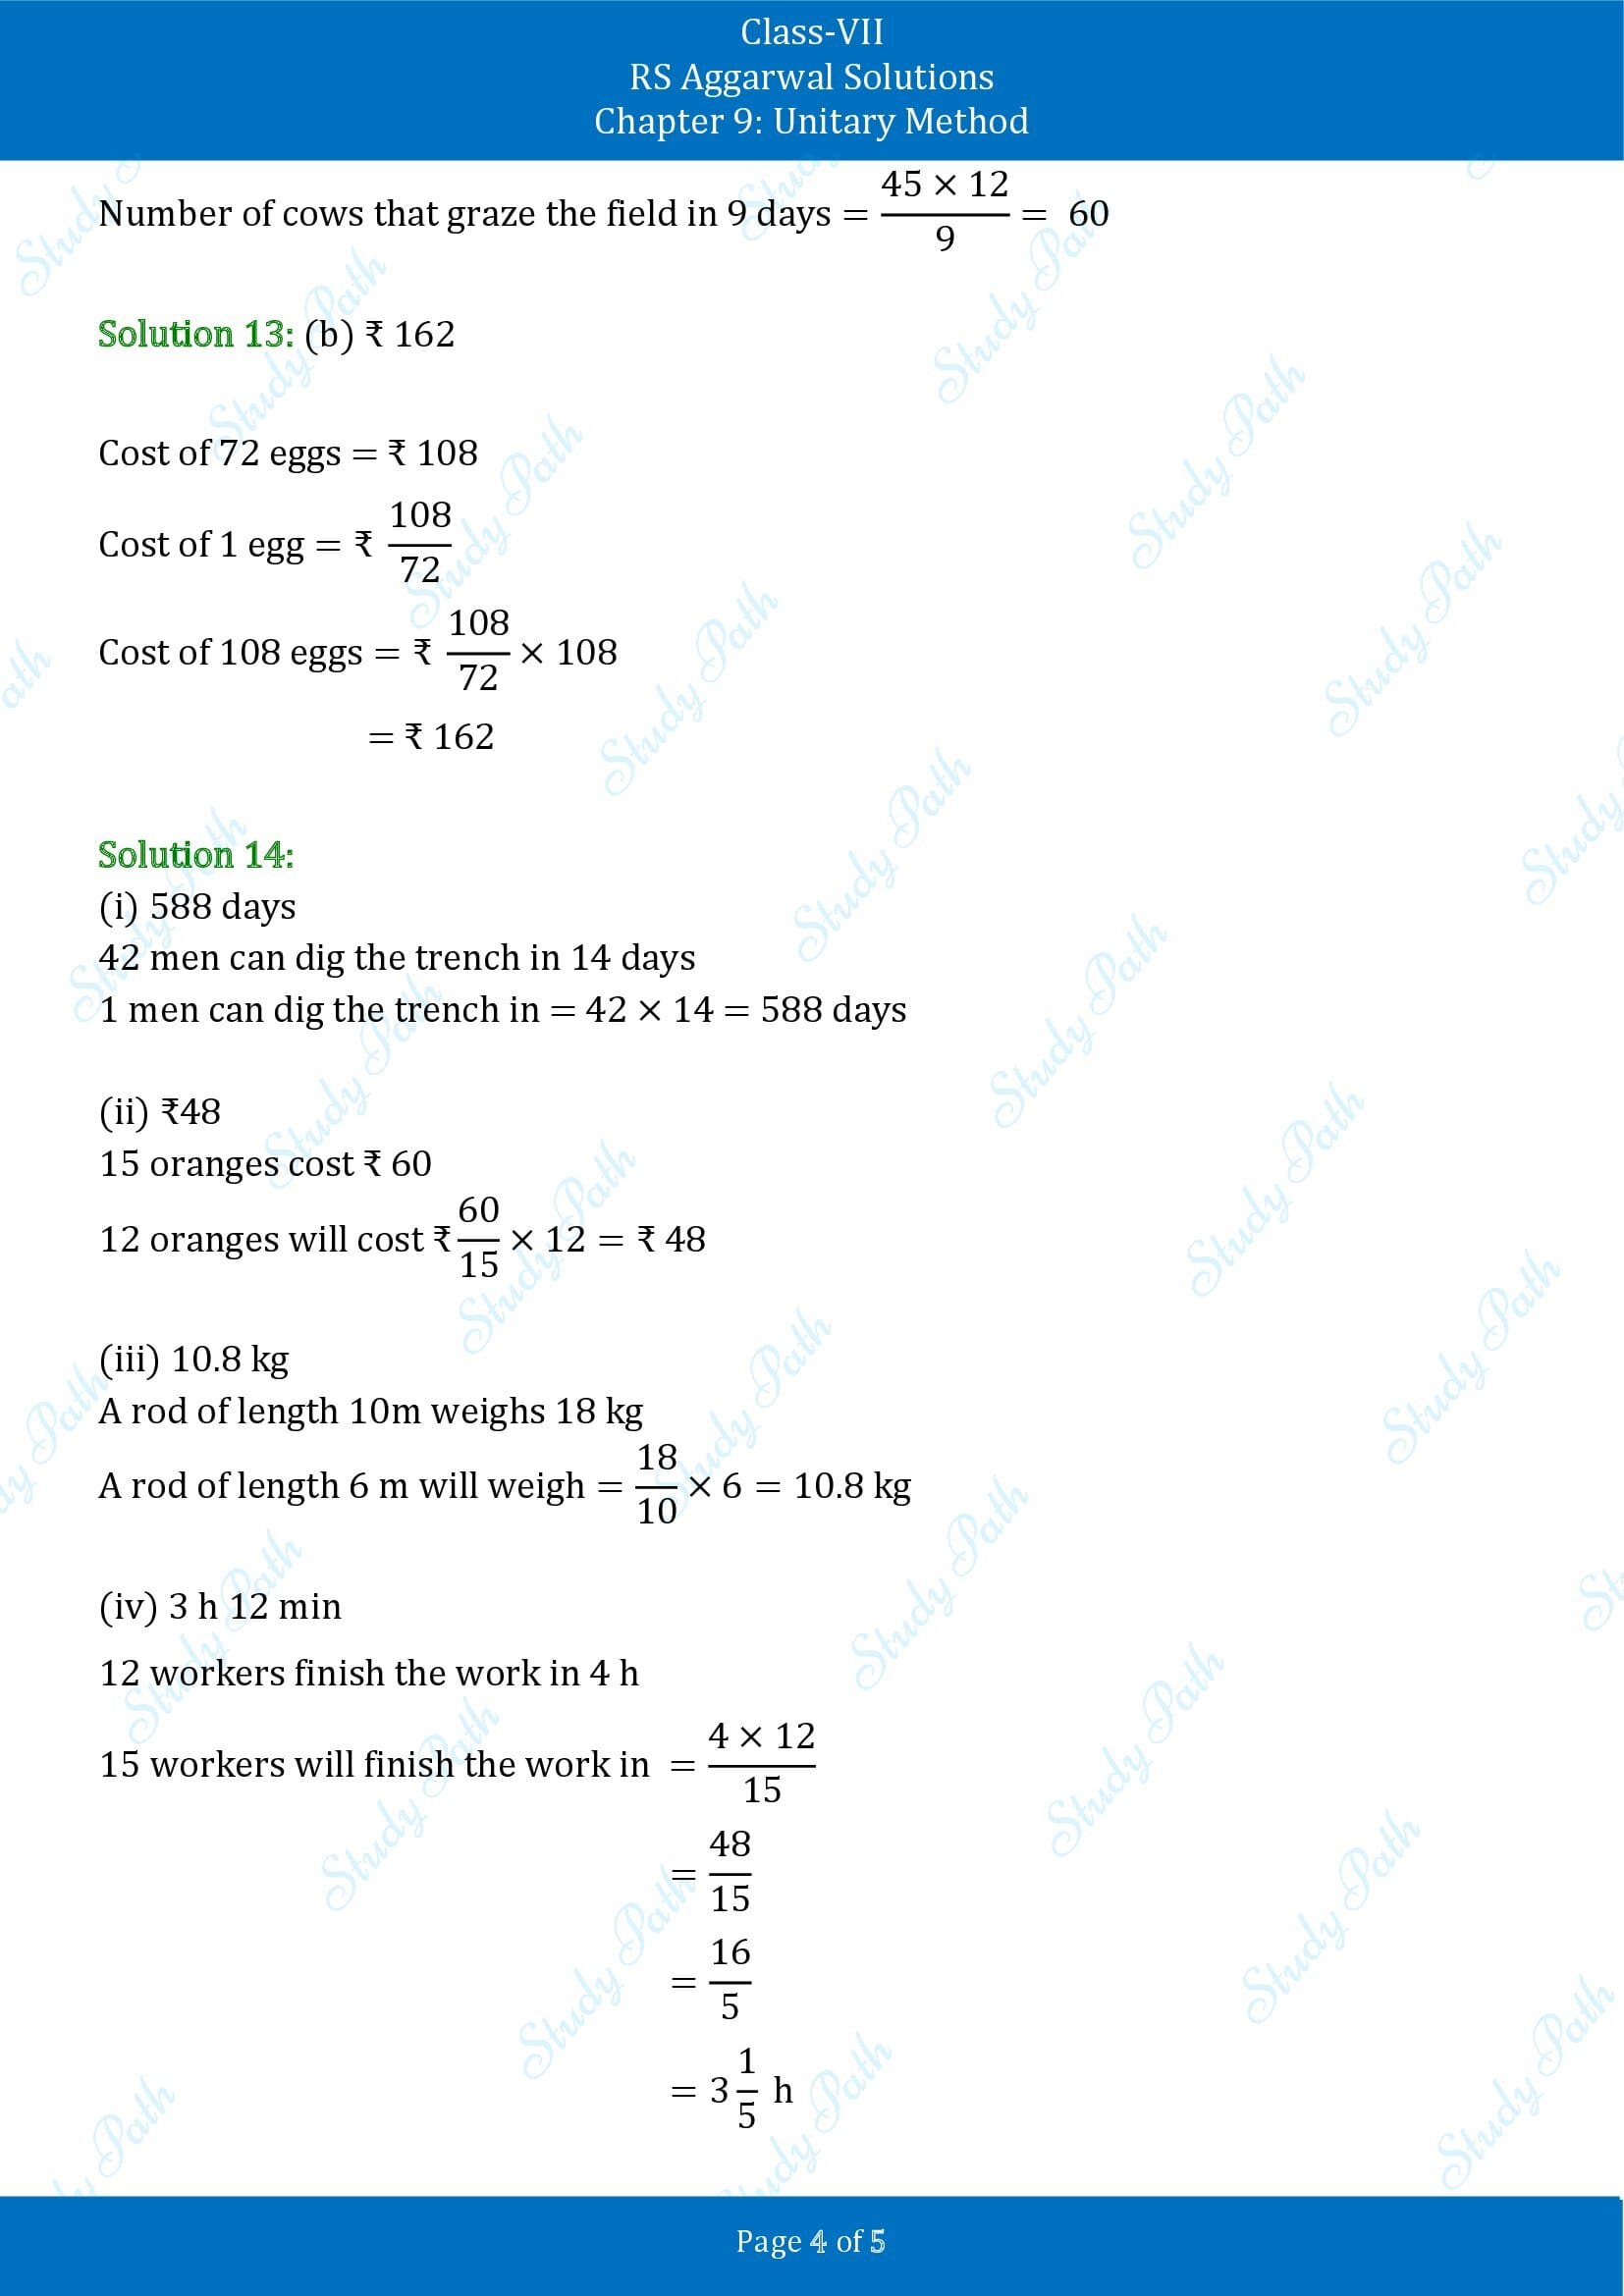 RS Aggarwal Solutions Class 7 Chapter 9 Unitary Method Test Paper 00004